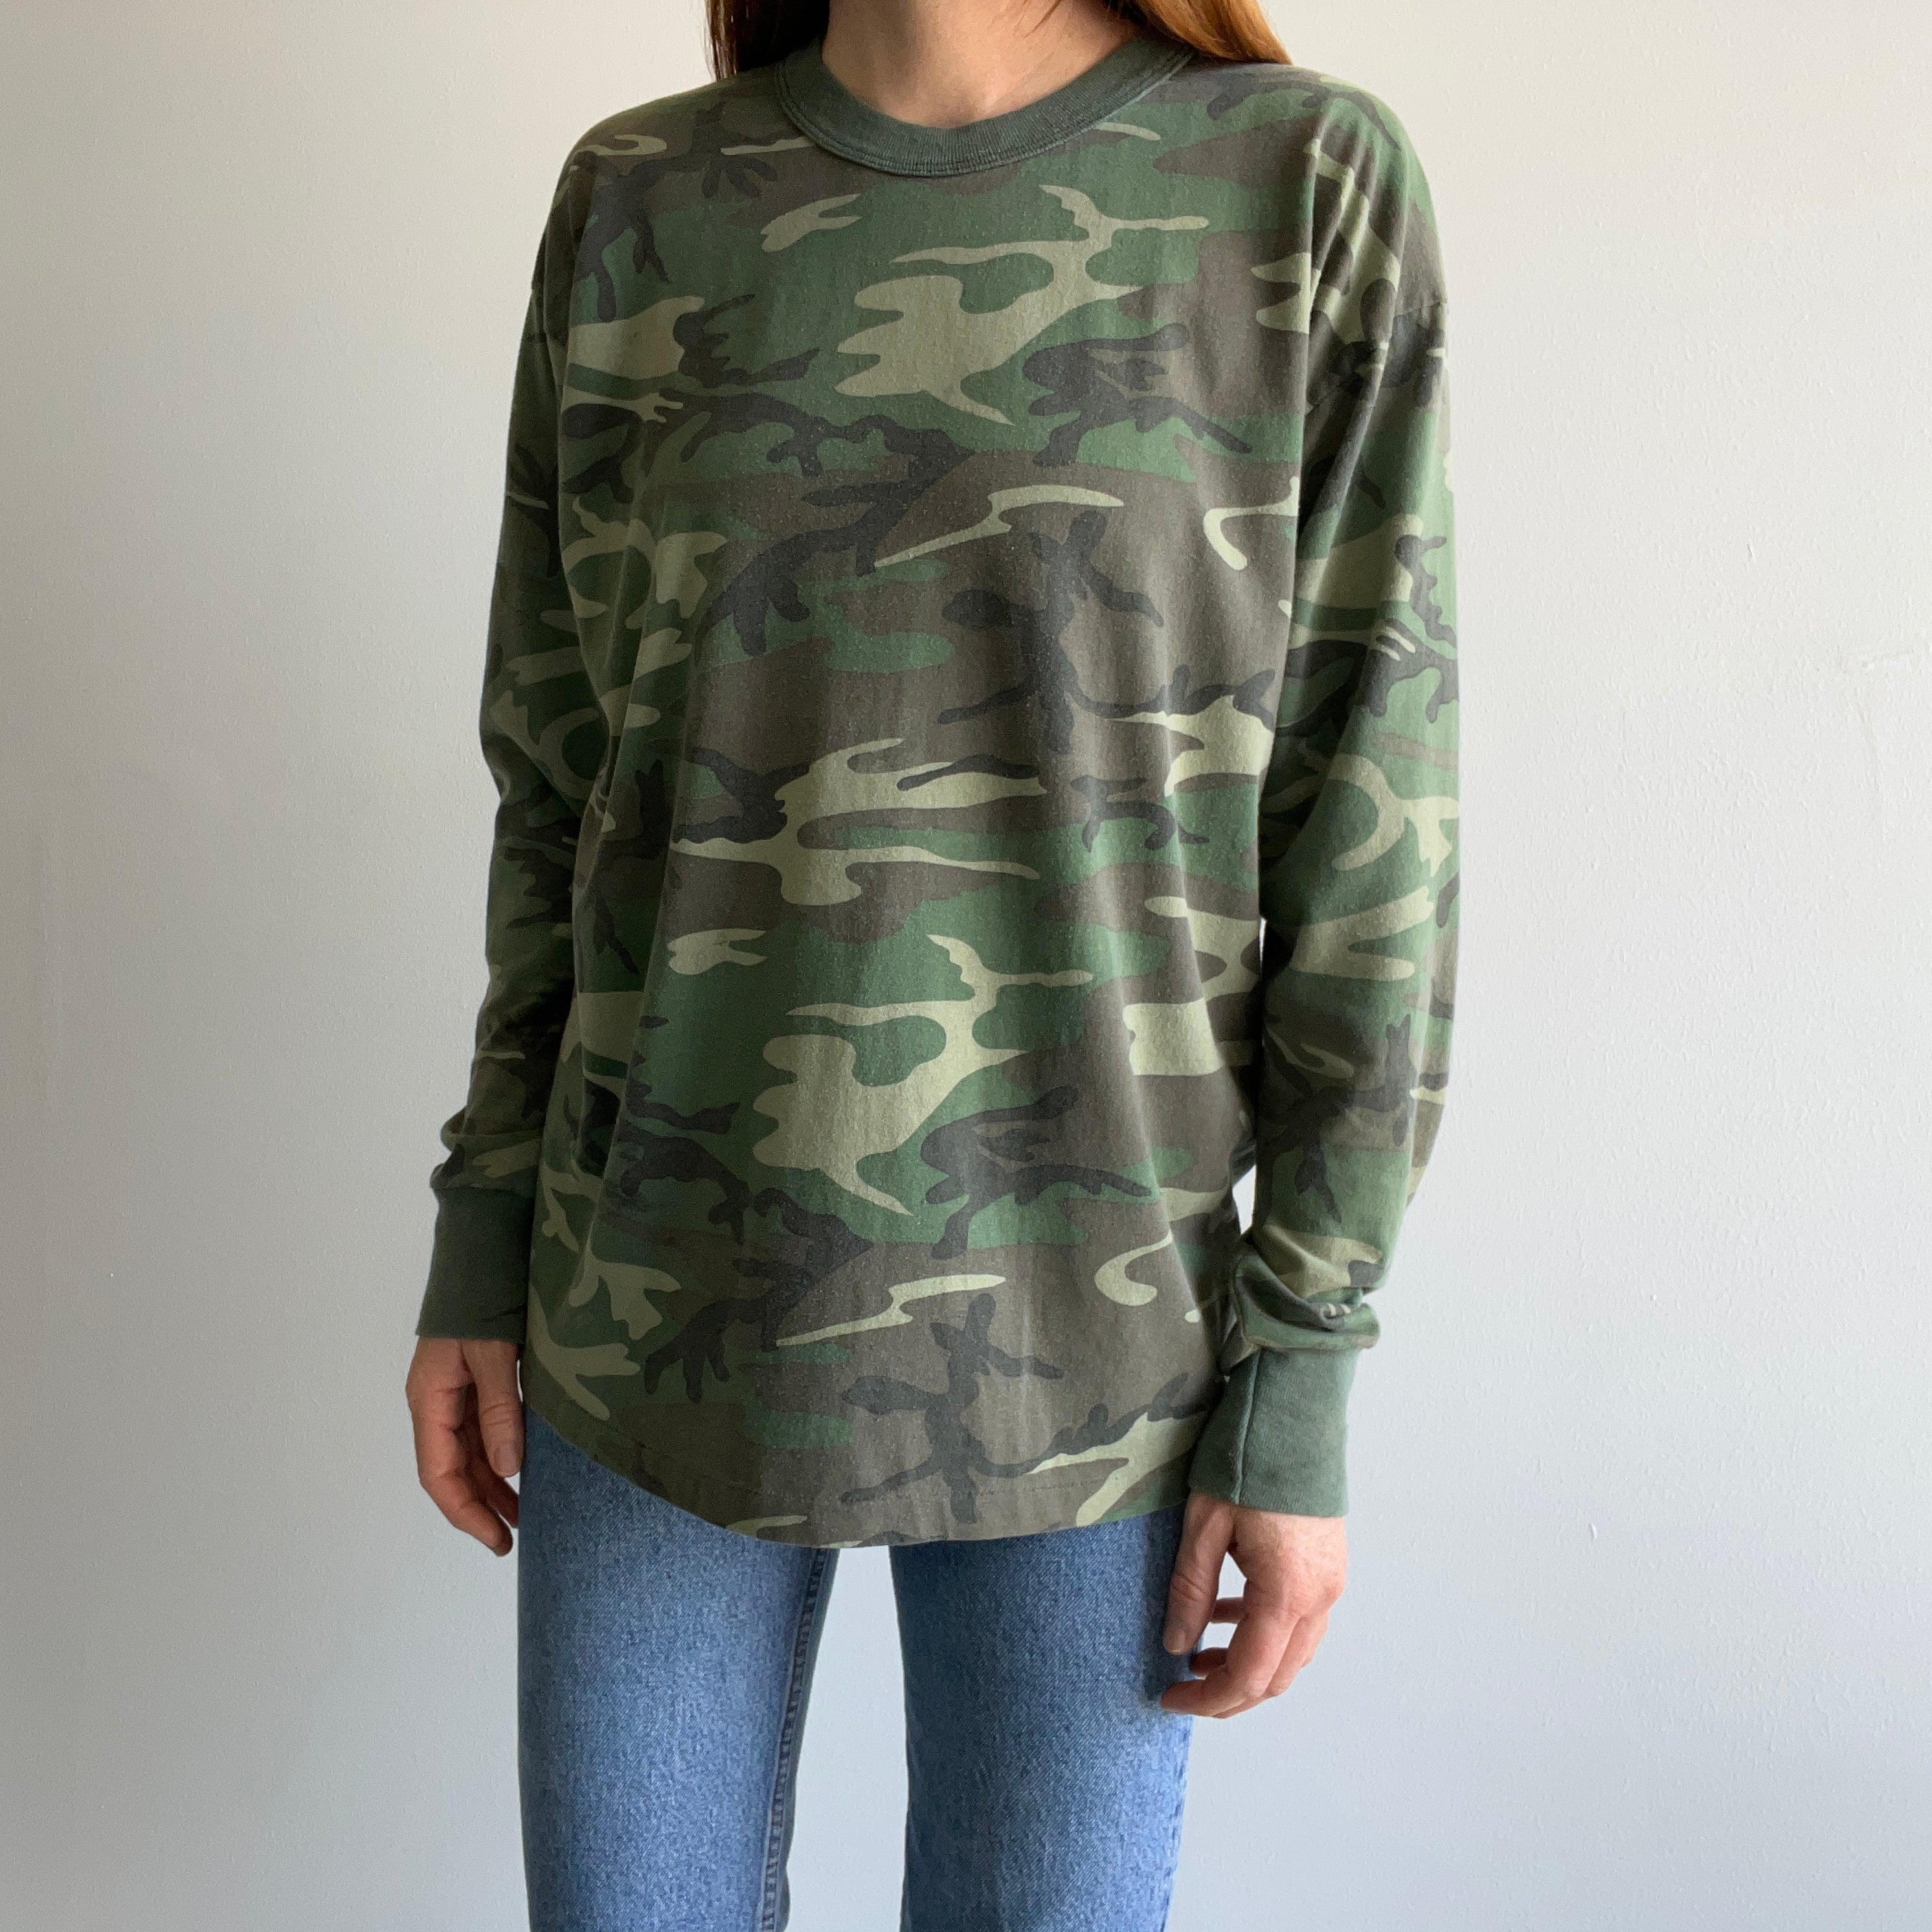 1980s Rothco Camo Long Sleeve Shirt with Staining and Wear